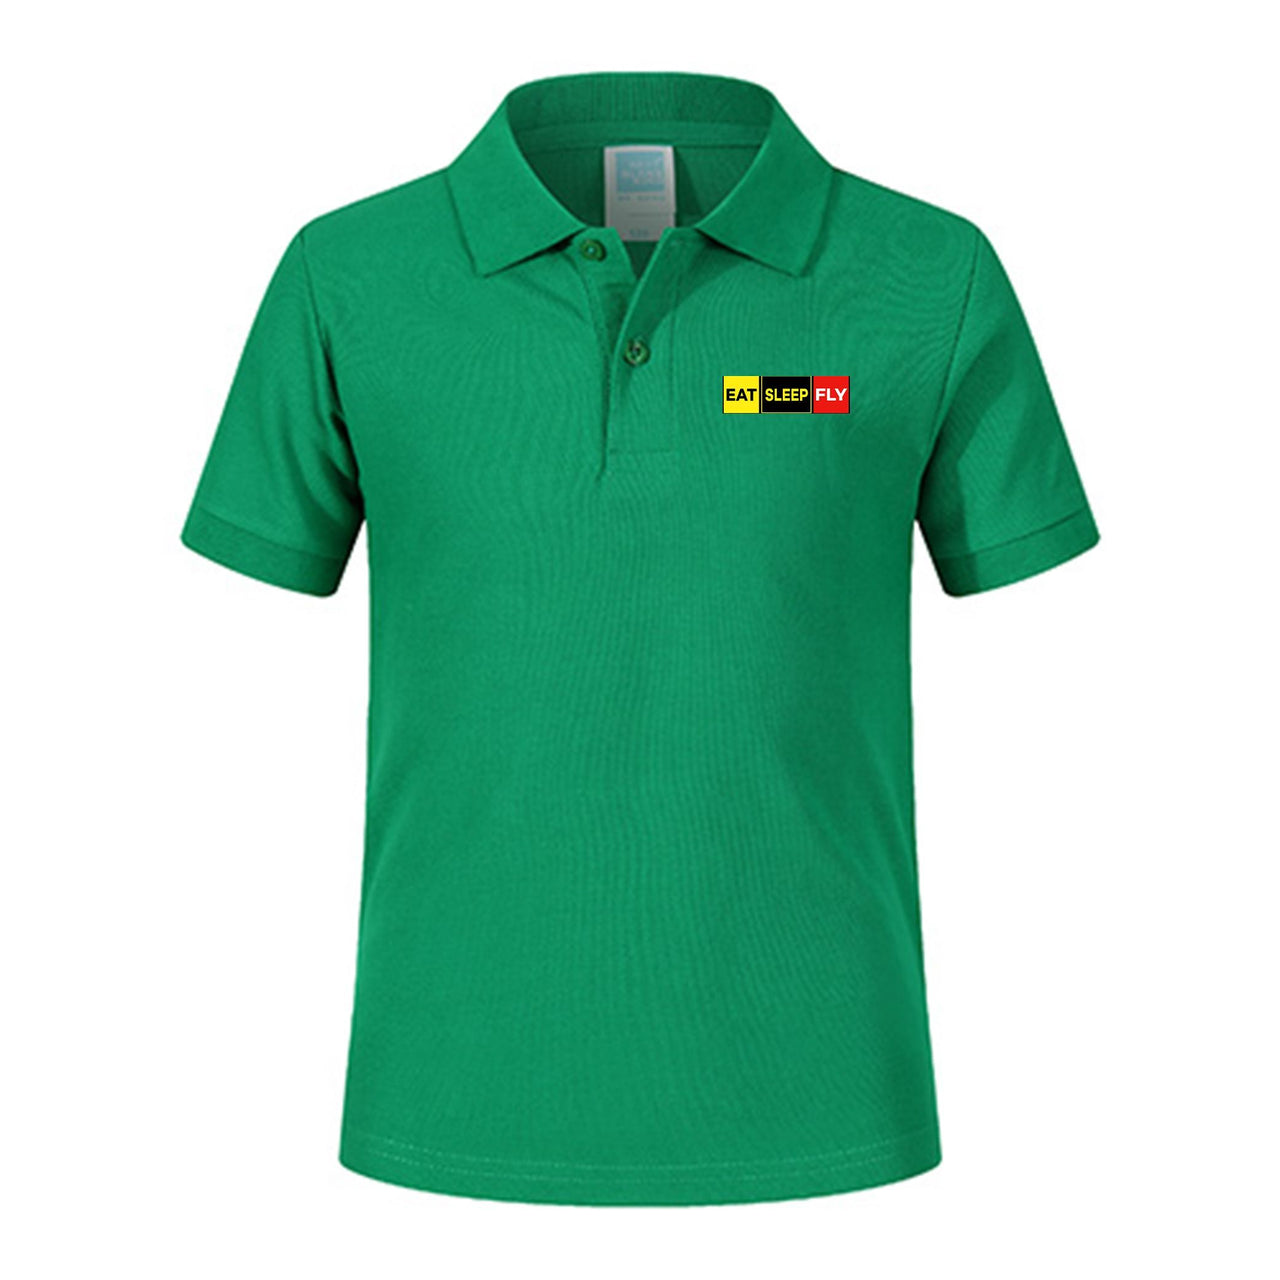 Eat Sleep Fly (Colourful) Designed Children Polo T-Shirts